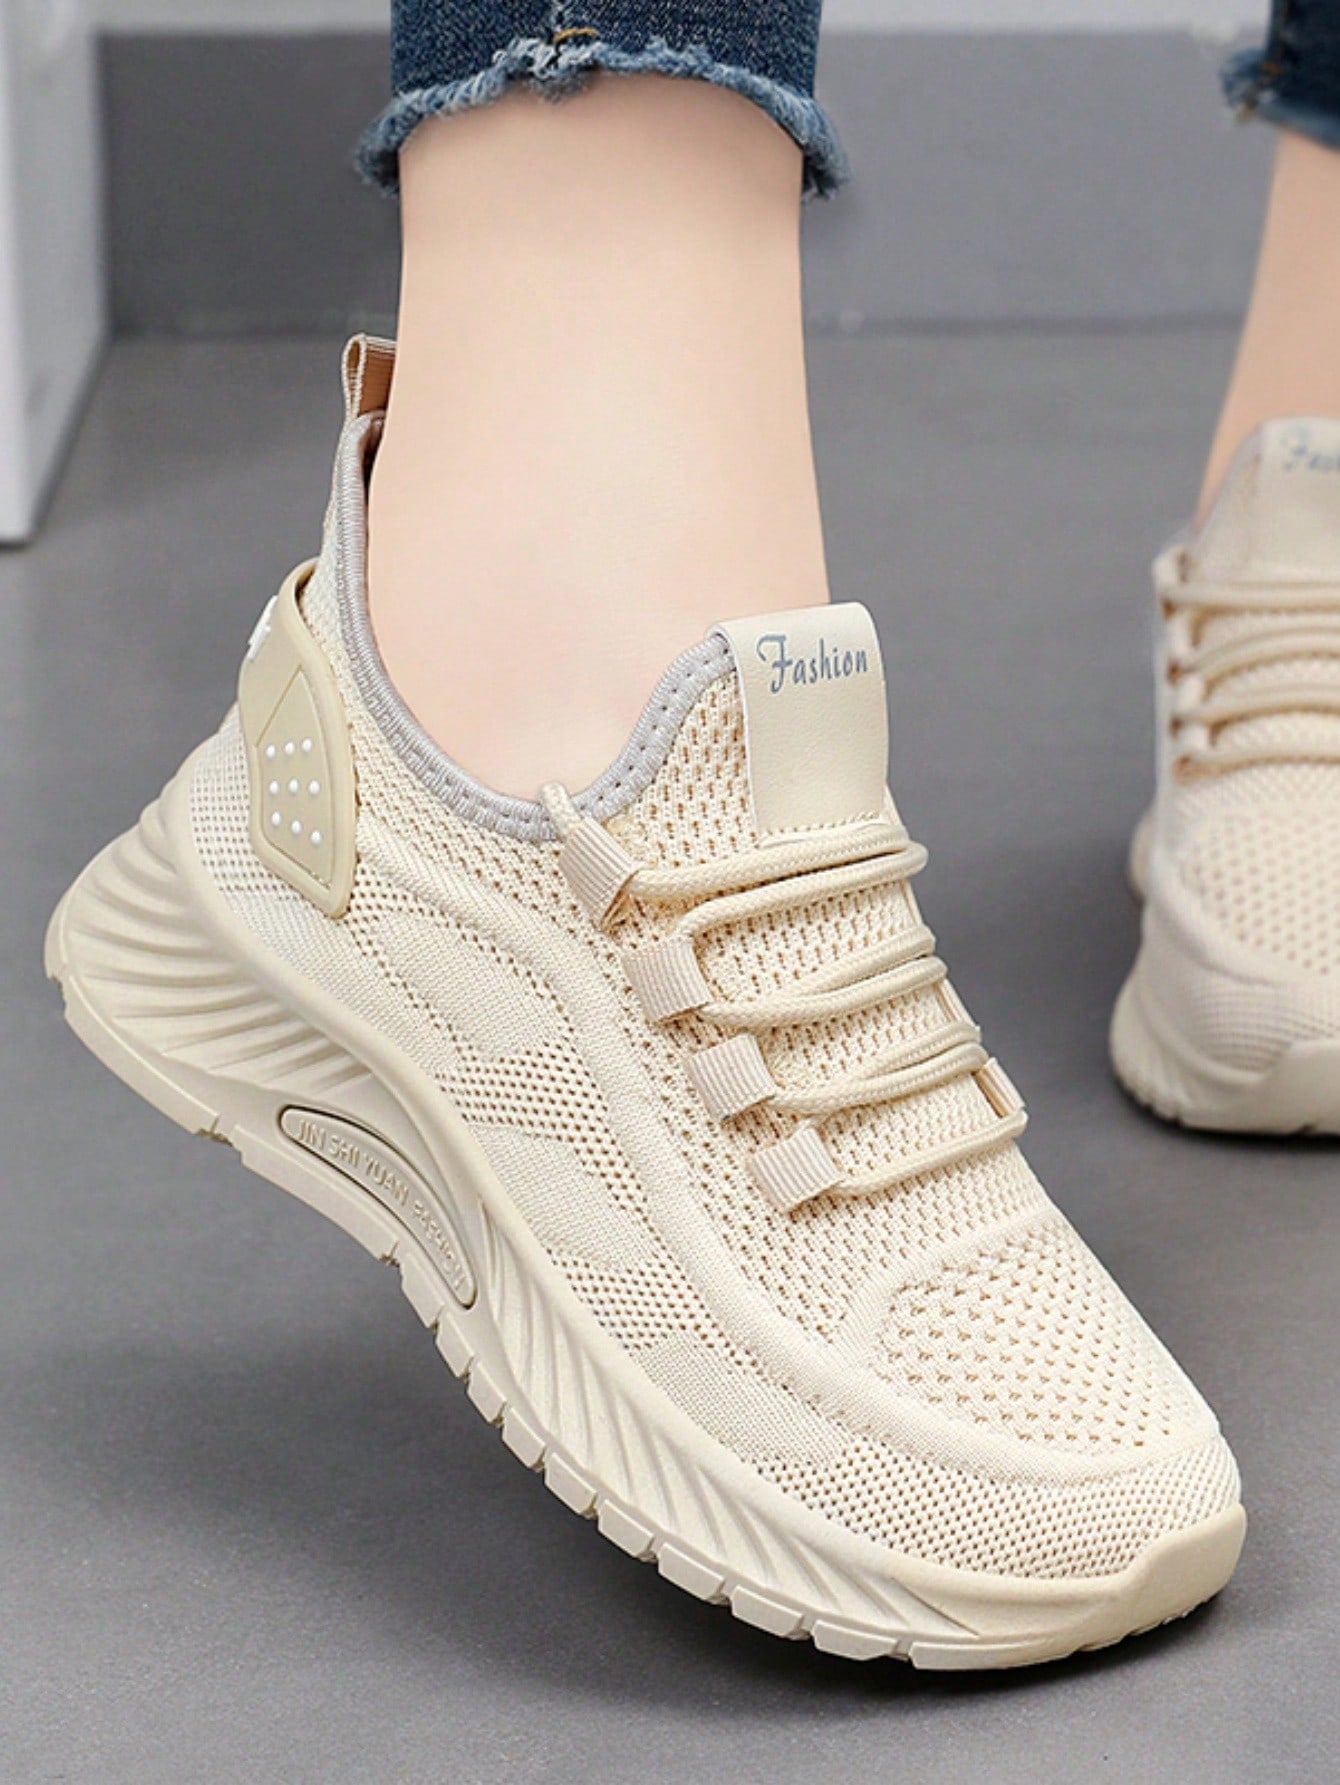 New Season Running Shoes For Women, Lightweight, Comfortable, Shock-Absorbing, Non-Slip, Breathable, Knitted, Casual Athletic Sneakers, Walking Shoes-Beige-3